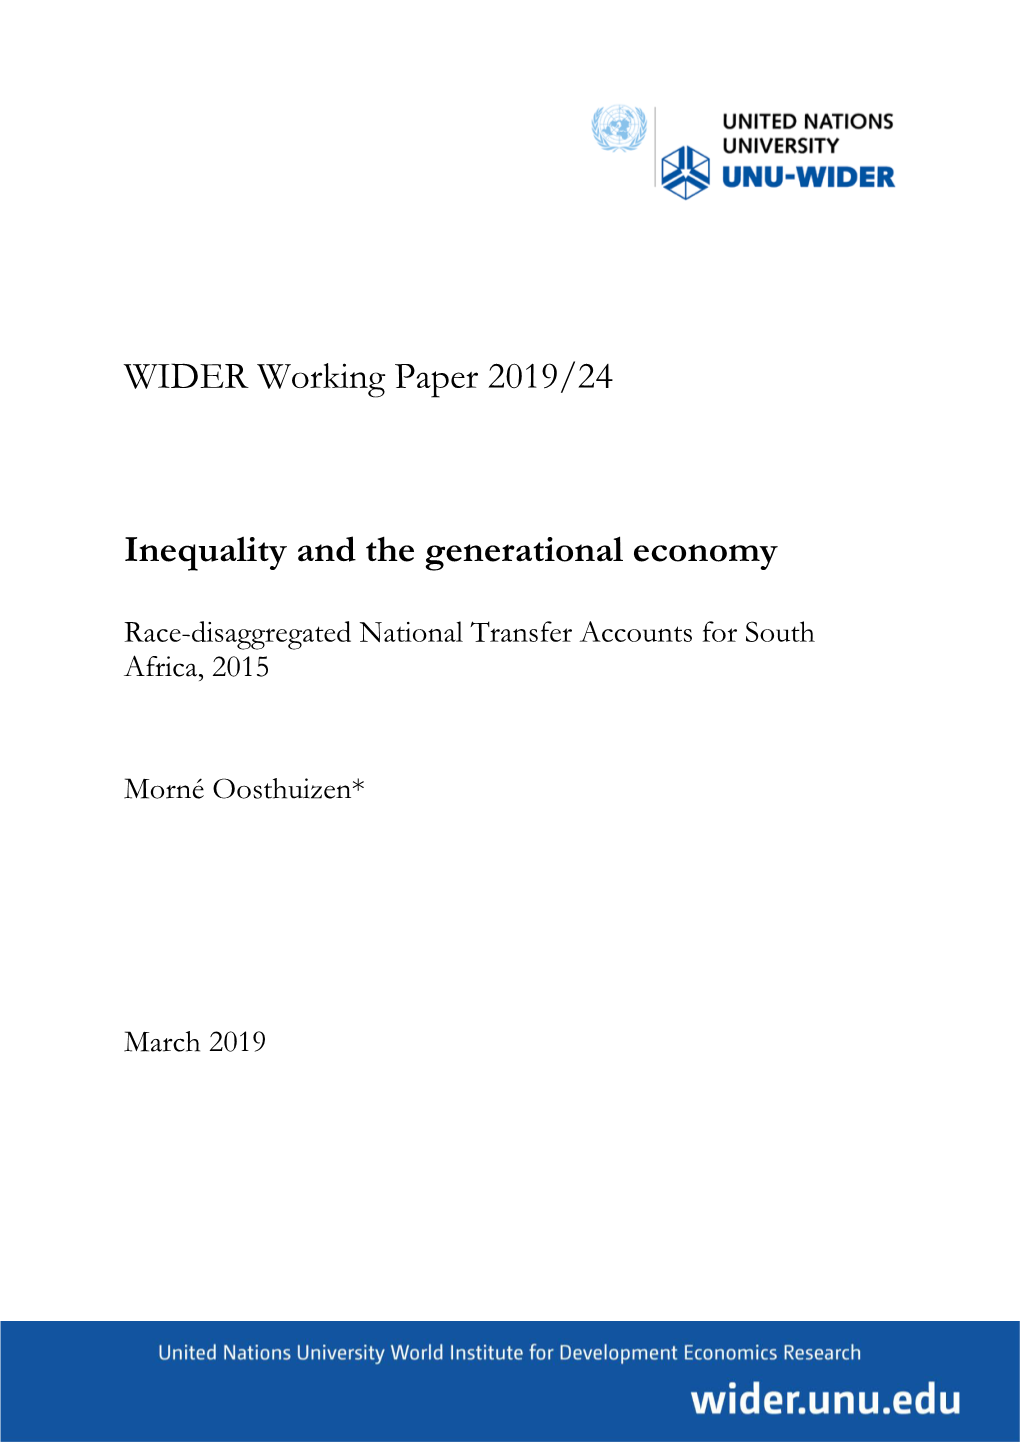 WIDER Working Paper 2019/24: Inequality and the Generational Economy Race-Disaggregated National Transfer Accounts for South